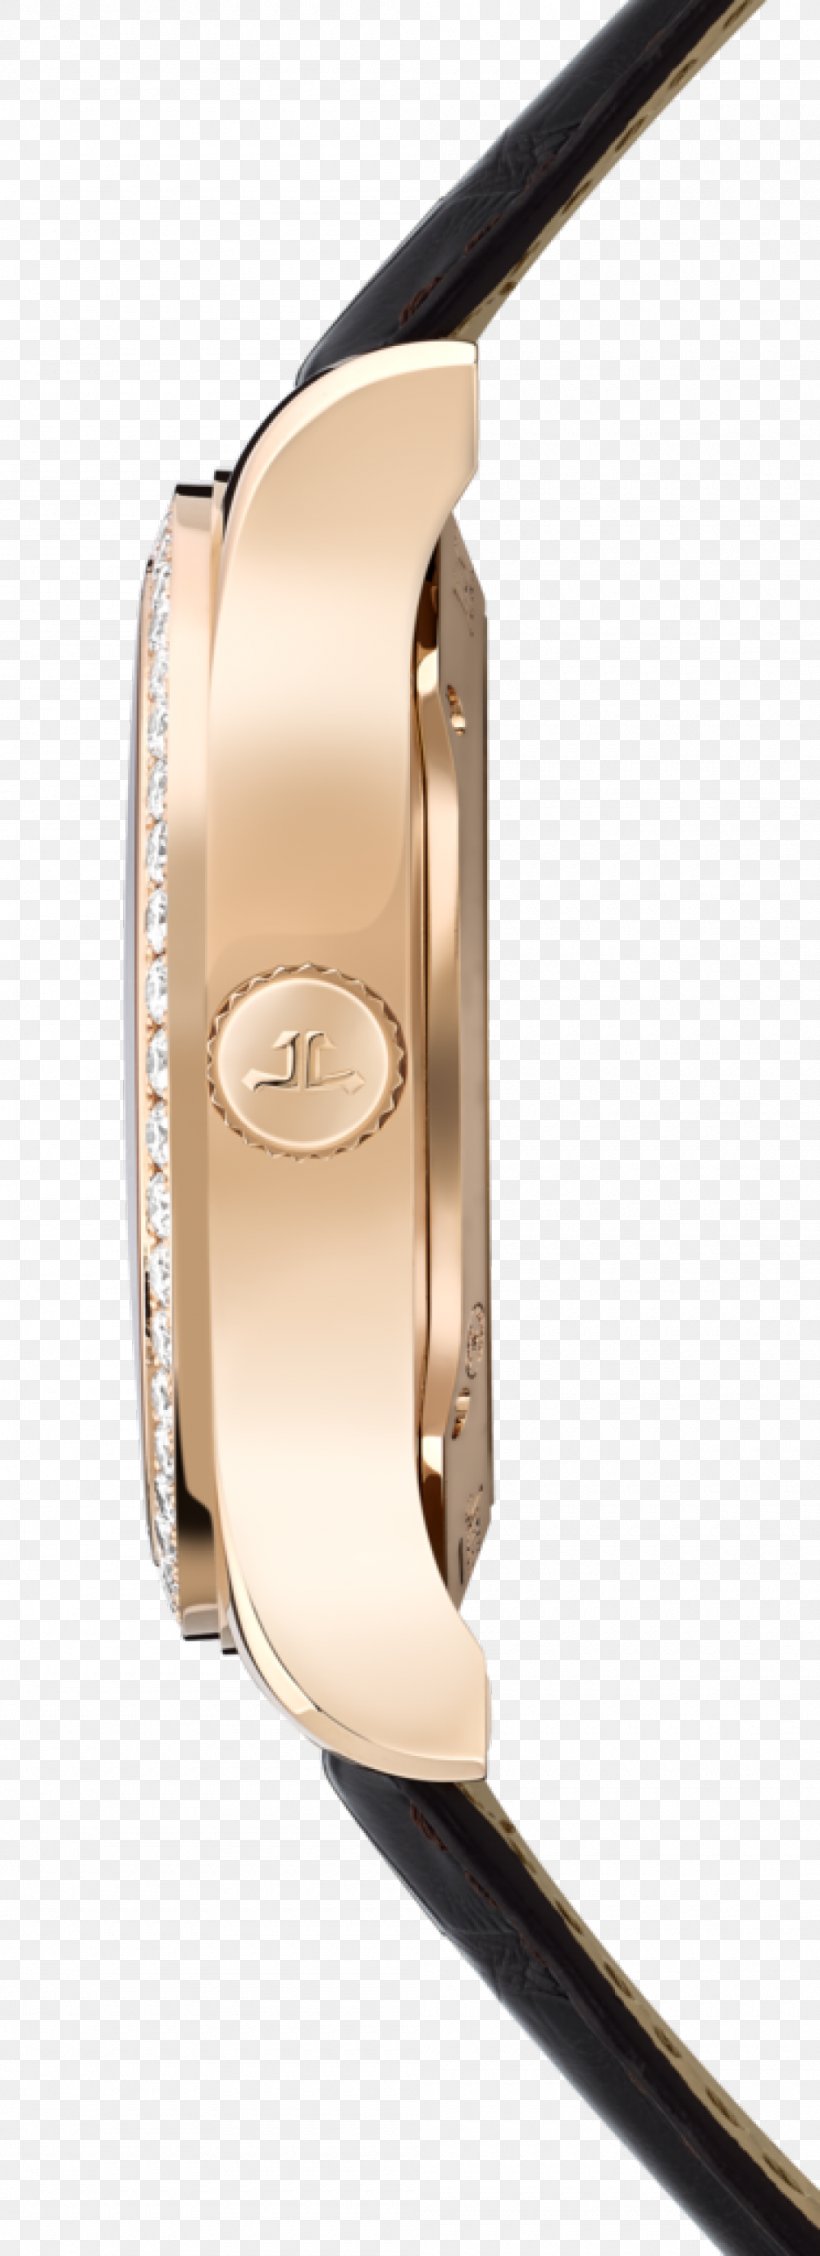 Watch Strap Metal, PNG, 1000x2752px, Watch, Clothing Accessories, Metal, Rectangle, Strap Download Free